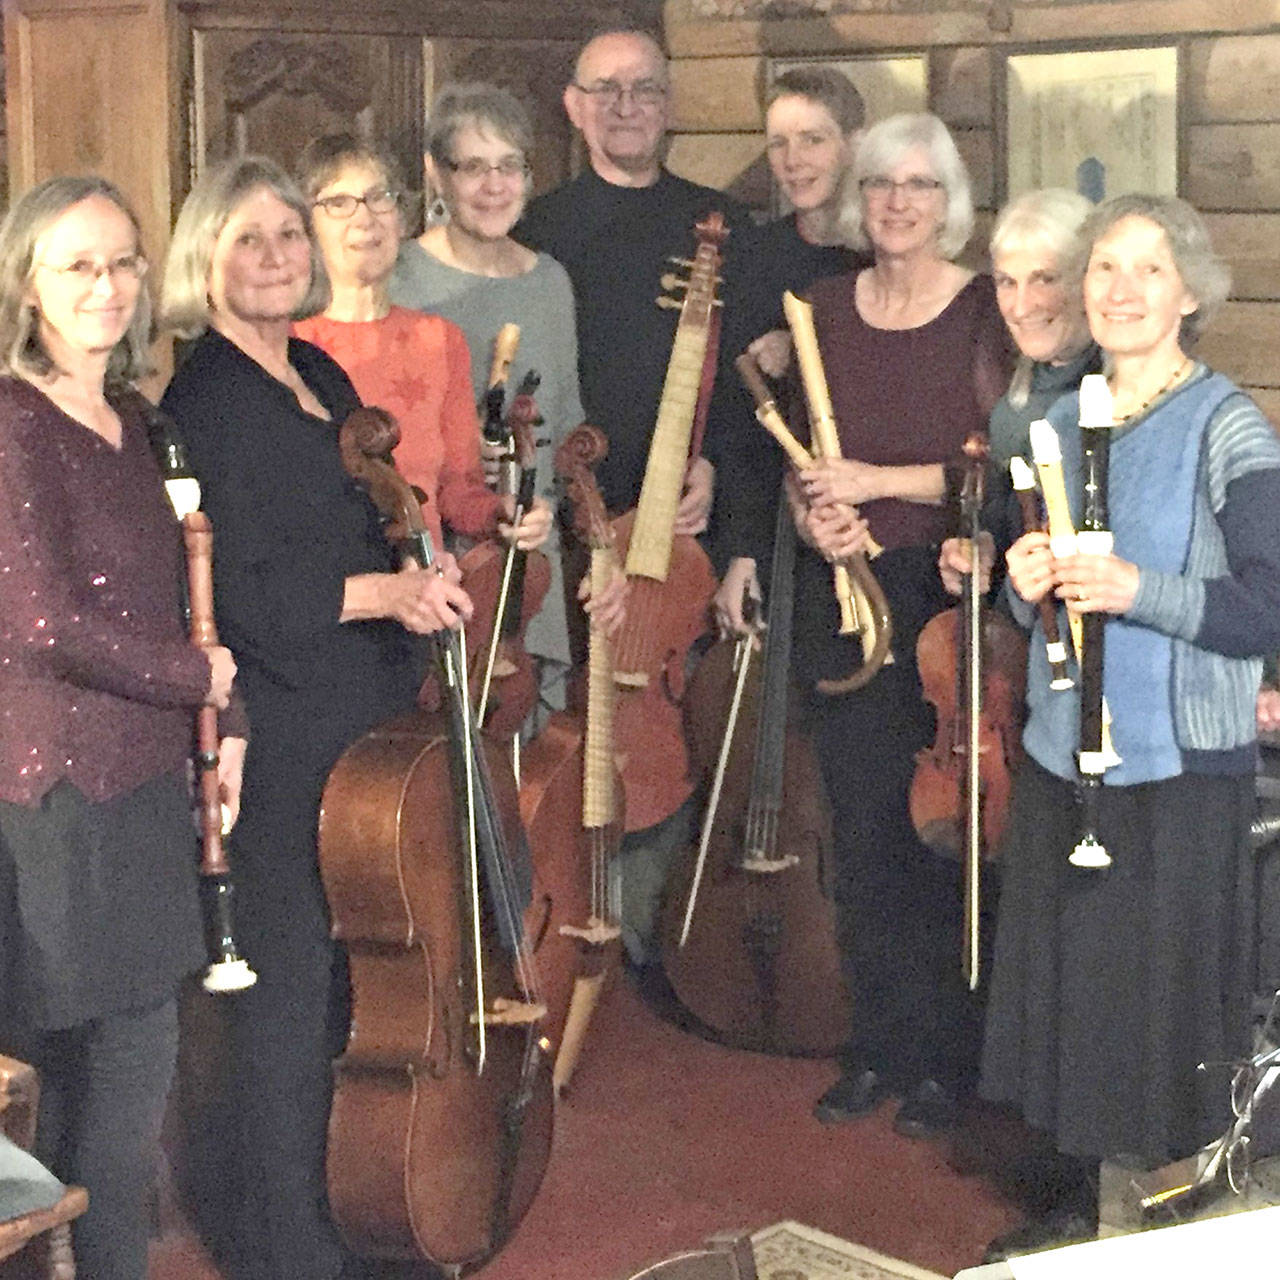 Barbra Tusting, Gretchen Cooper, Kristin Smith, Dahti Blanchard, Lee Inman, Martha Breunig, Louise Huntingford, Marcy Stewart and Bea Dobyns and prepare for the upcoming Candlelight Concert.